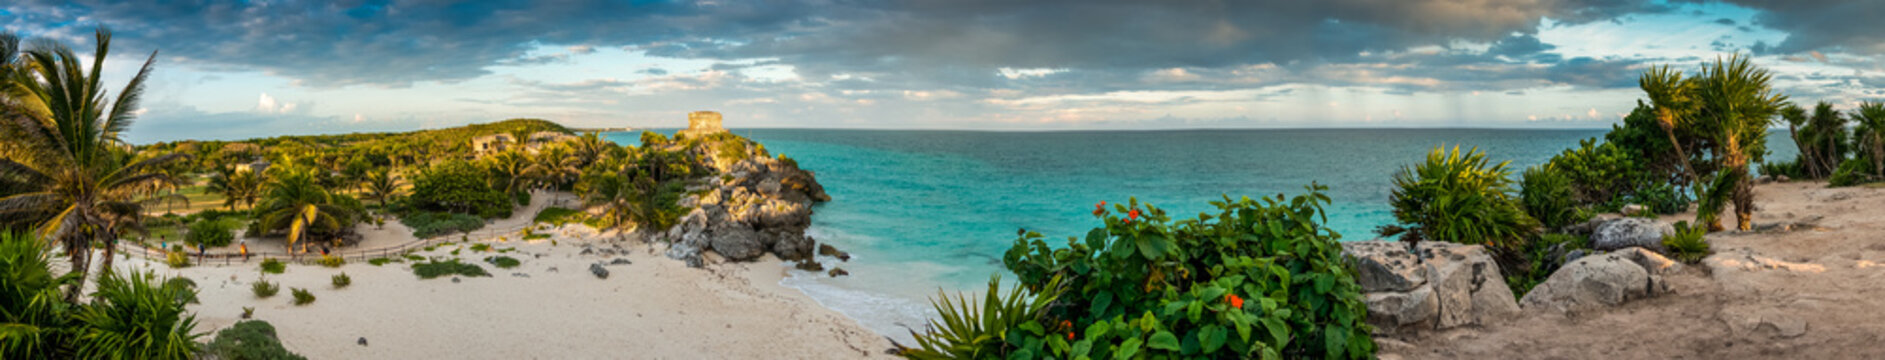 Archaeological site Tulum in Yucatan peninsula by the Caribbean Sea in Mexico